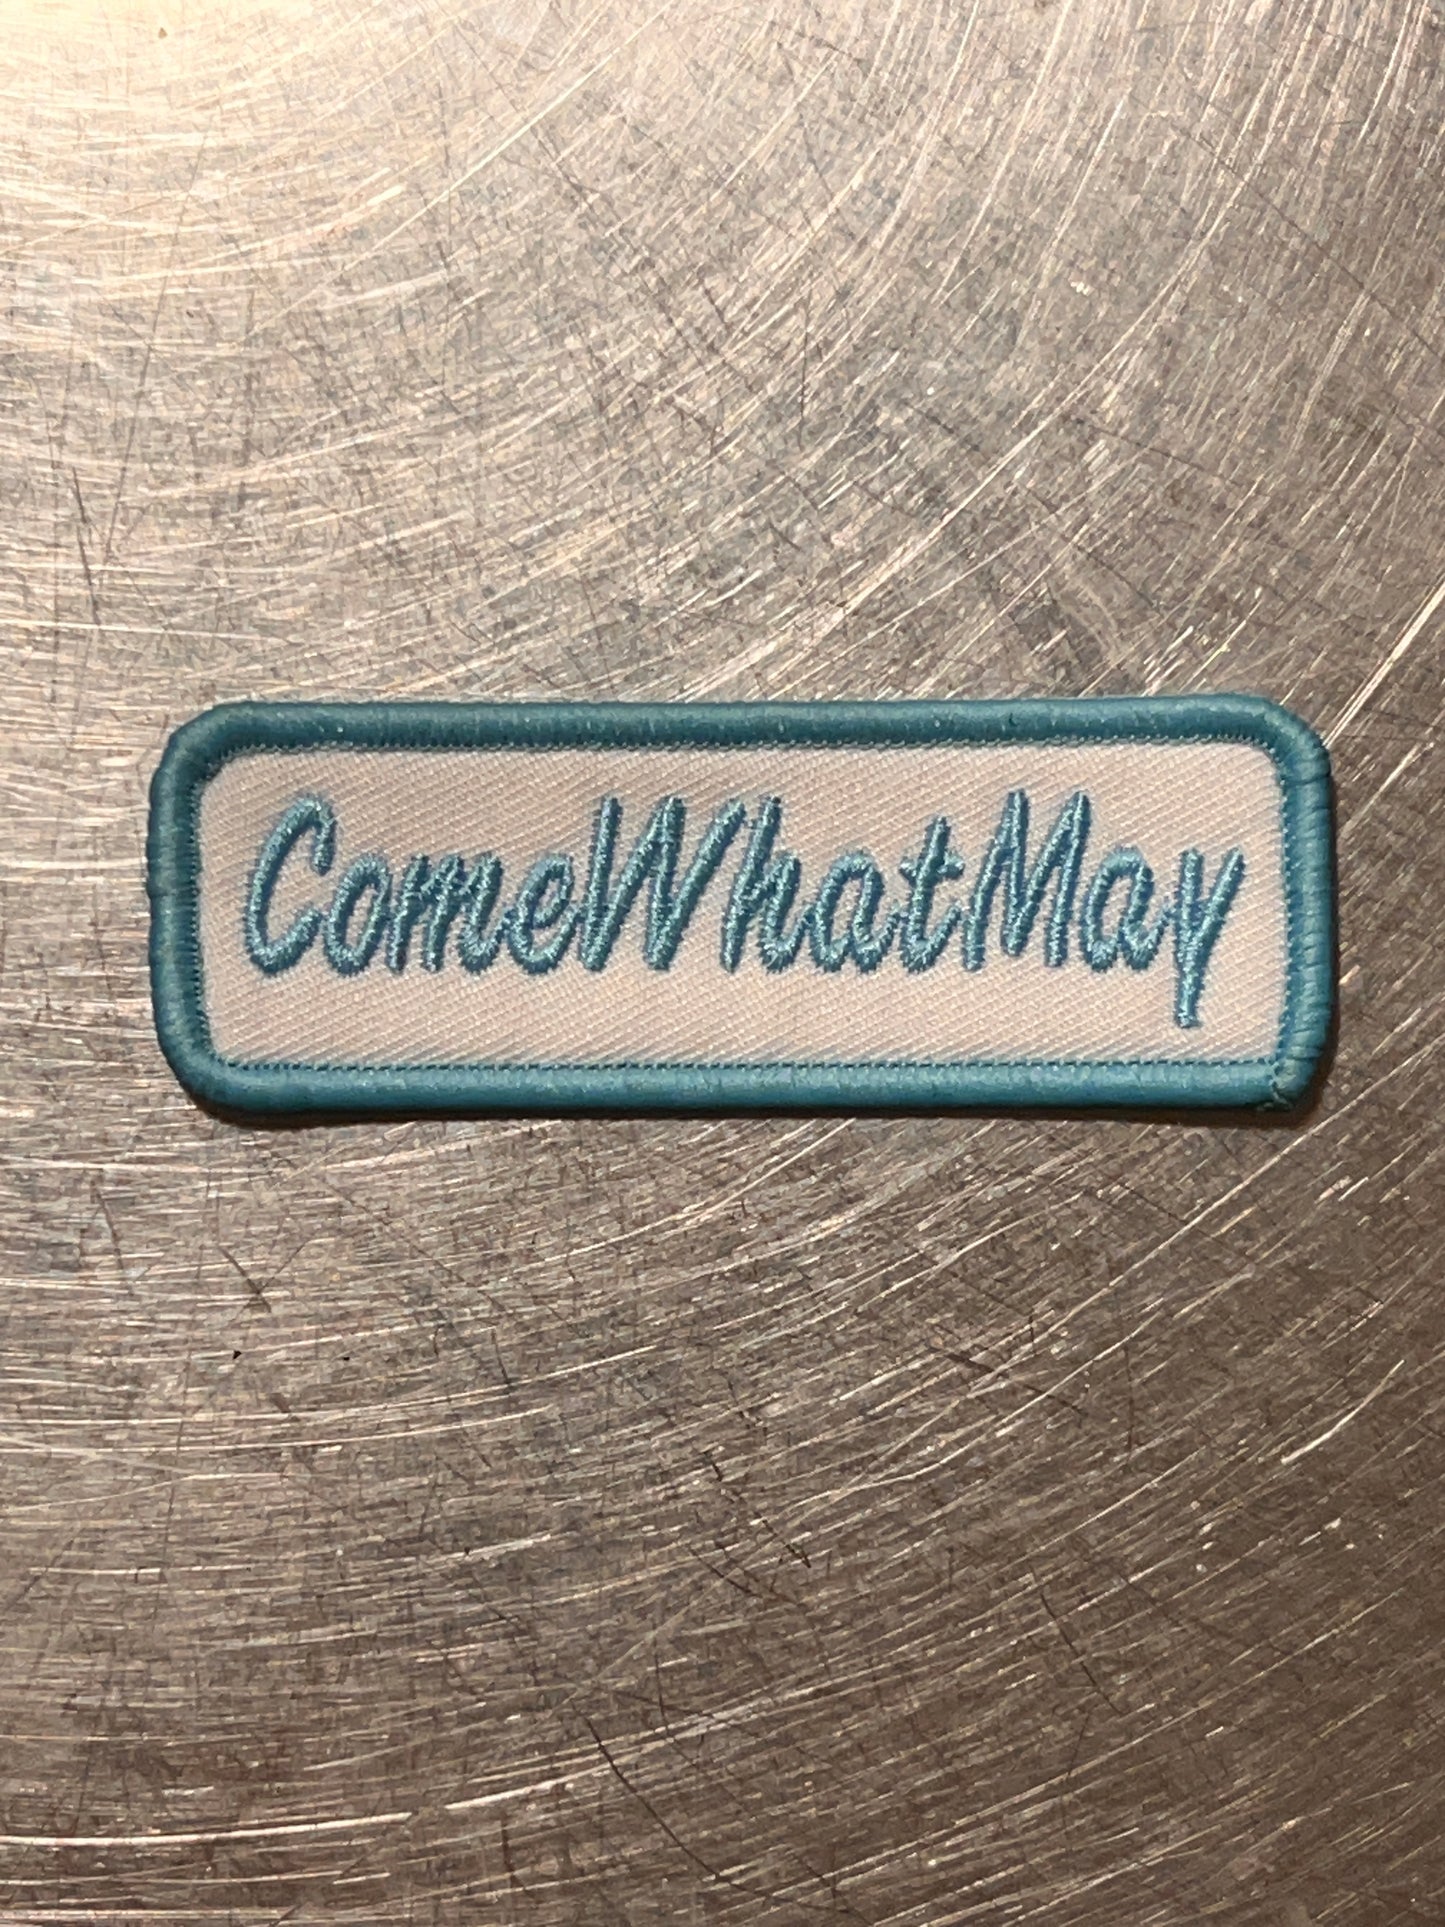 ‘ComeWhatMay’ embroidered patch